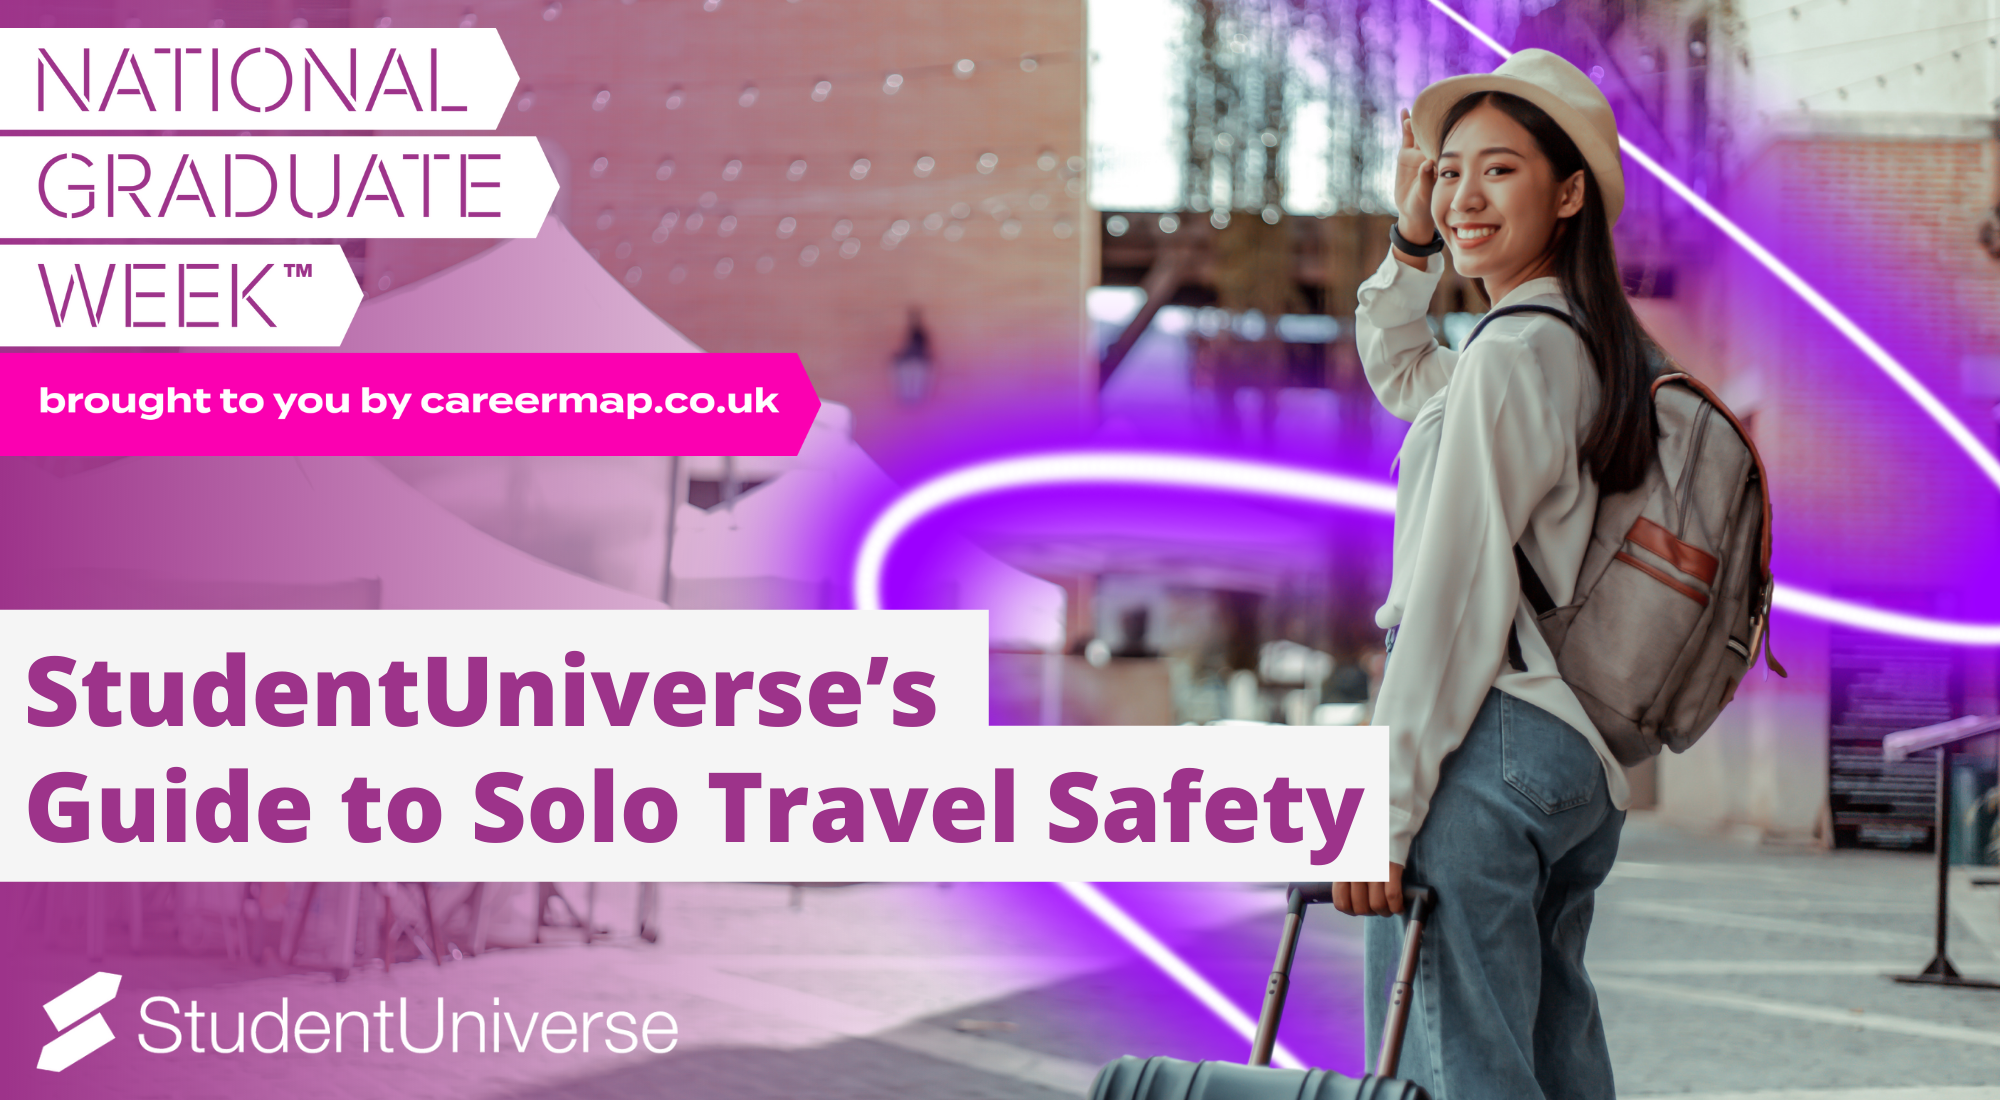 StudentUniverse’s Guide to Solo Travel Safety